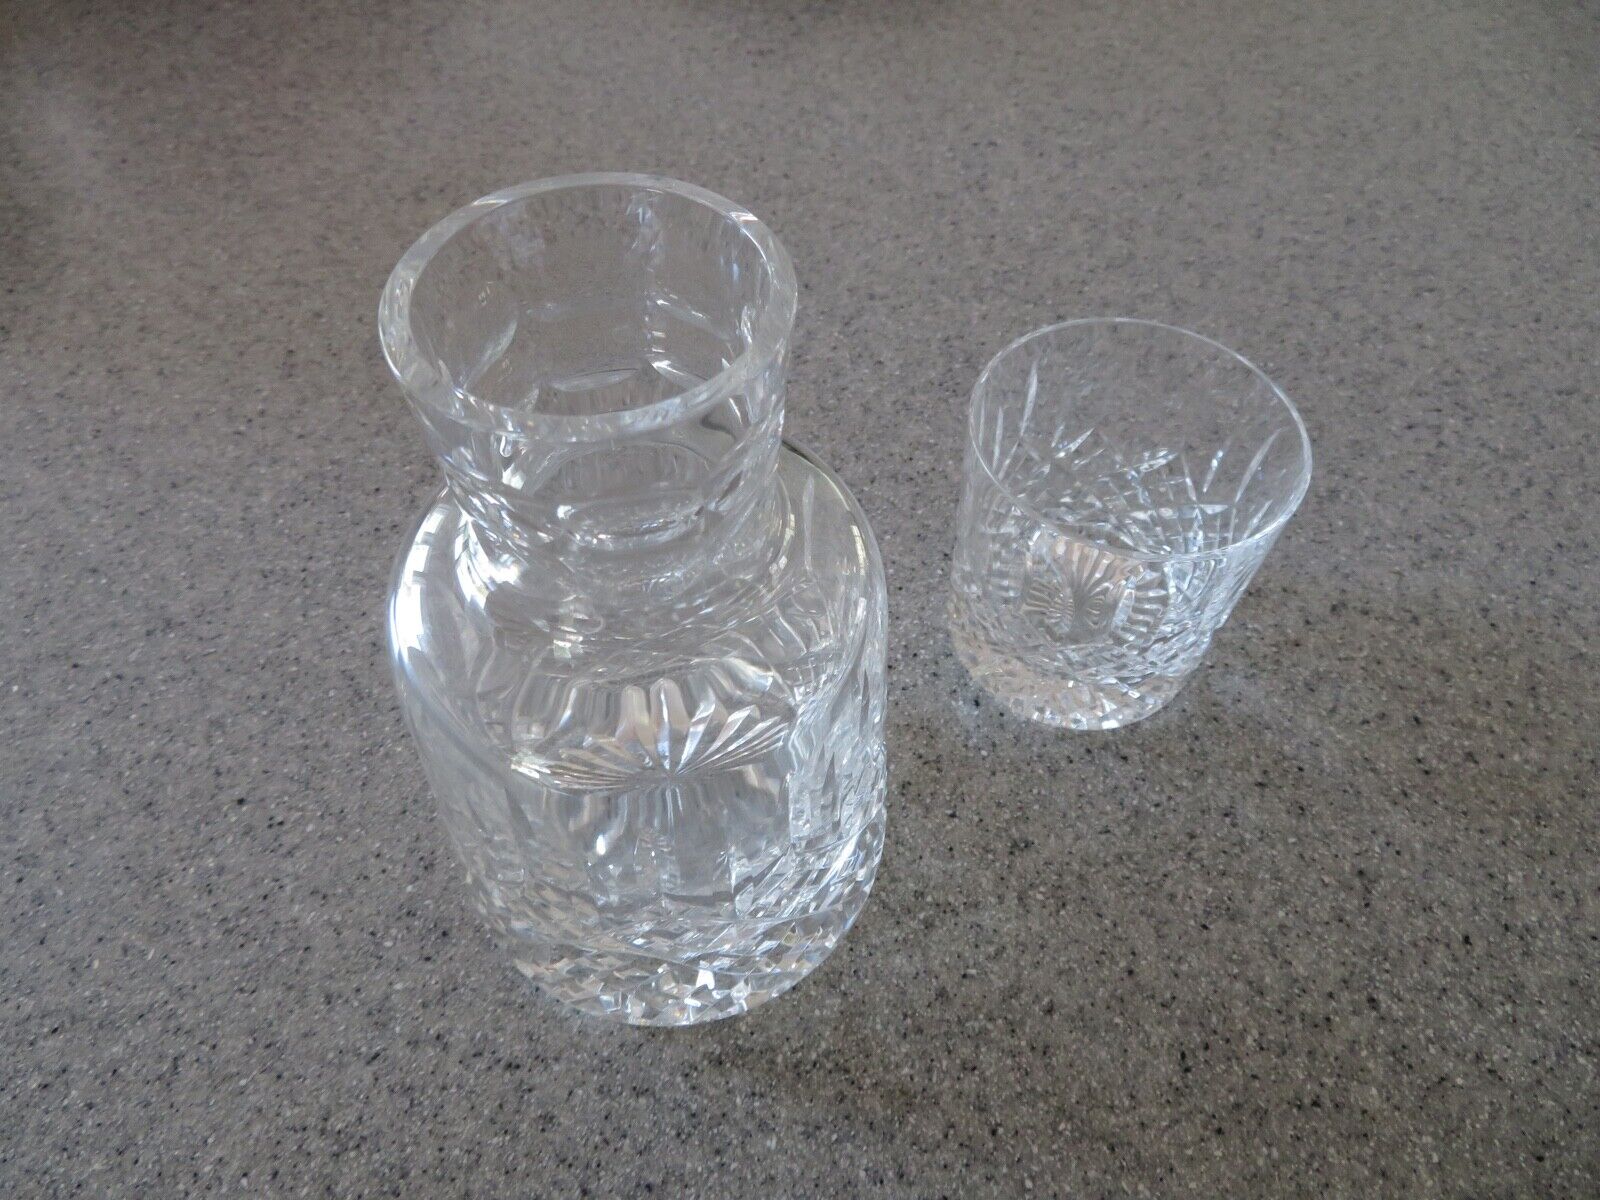 Vintage STUART CRYSTAL ritzy bedside water carafe and glass CAMBRIDGE pattern?